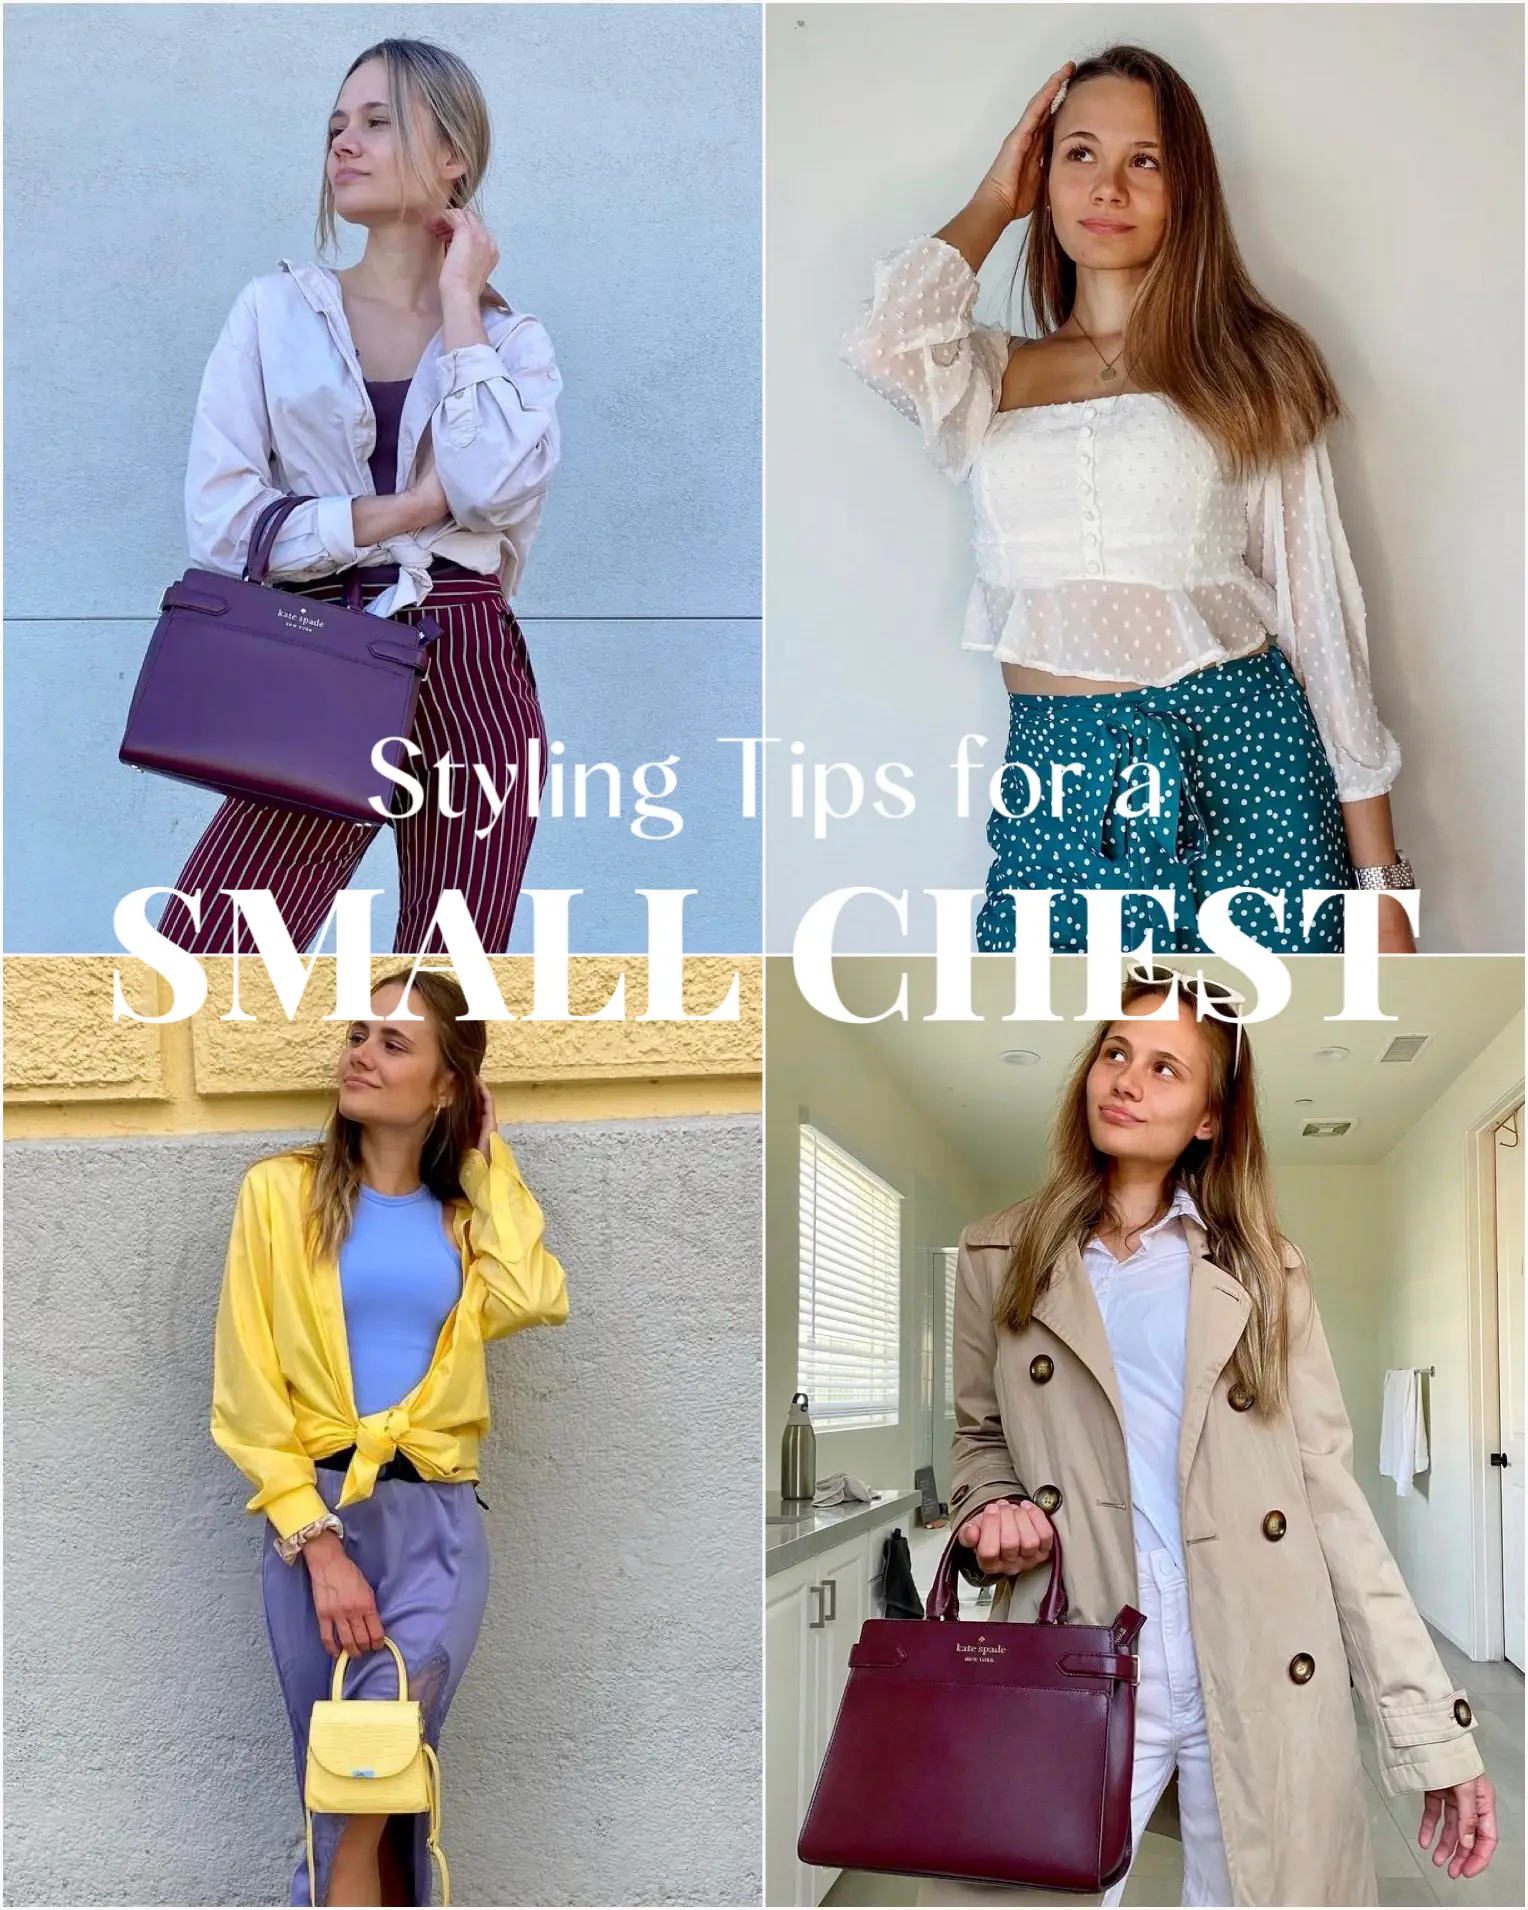 How to Dress If You Have a SMALL CHEST, Gallery posted by Krissi Sophie